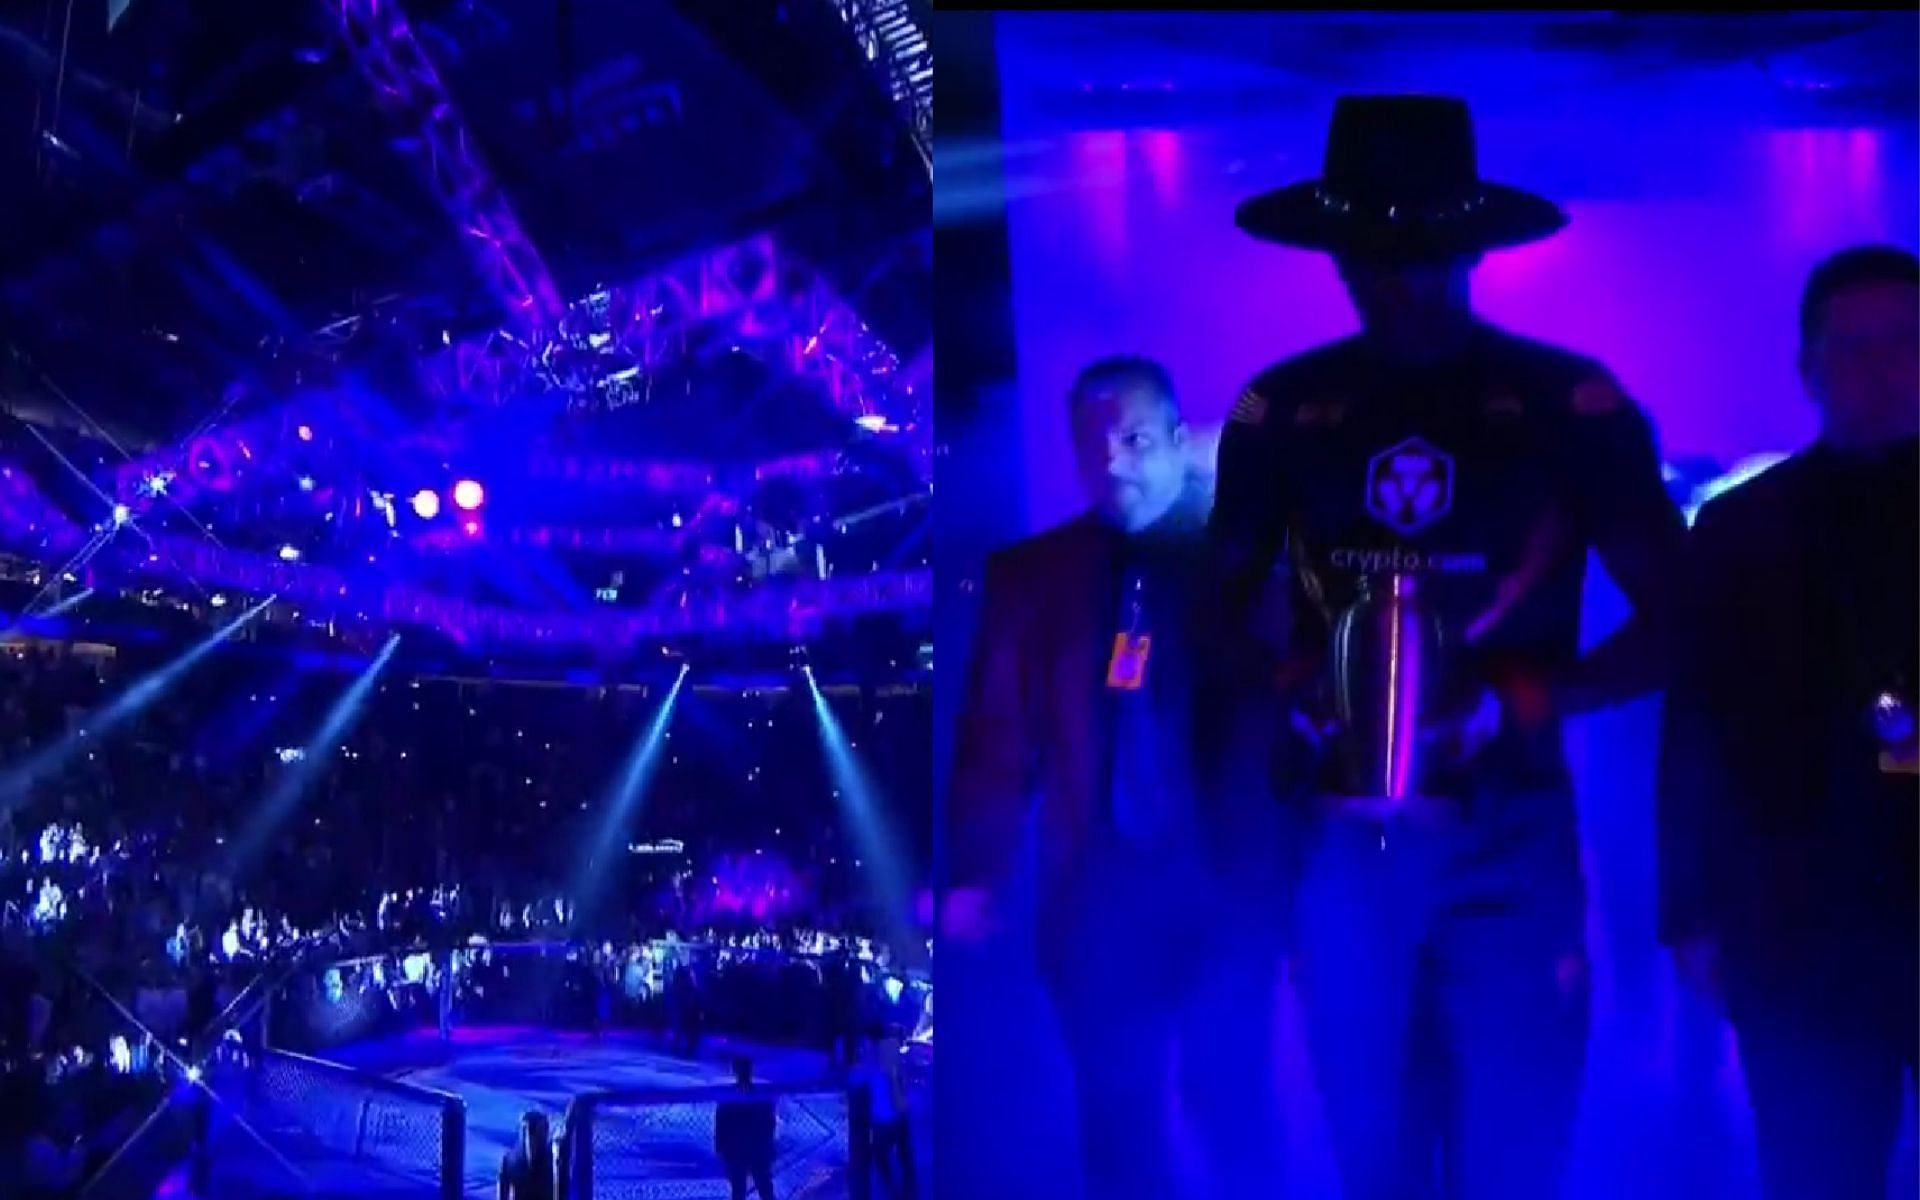 Israel Adesanya paid tribute to The Undertaker at UFC 276